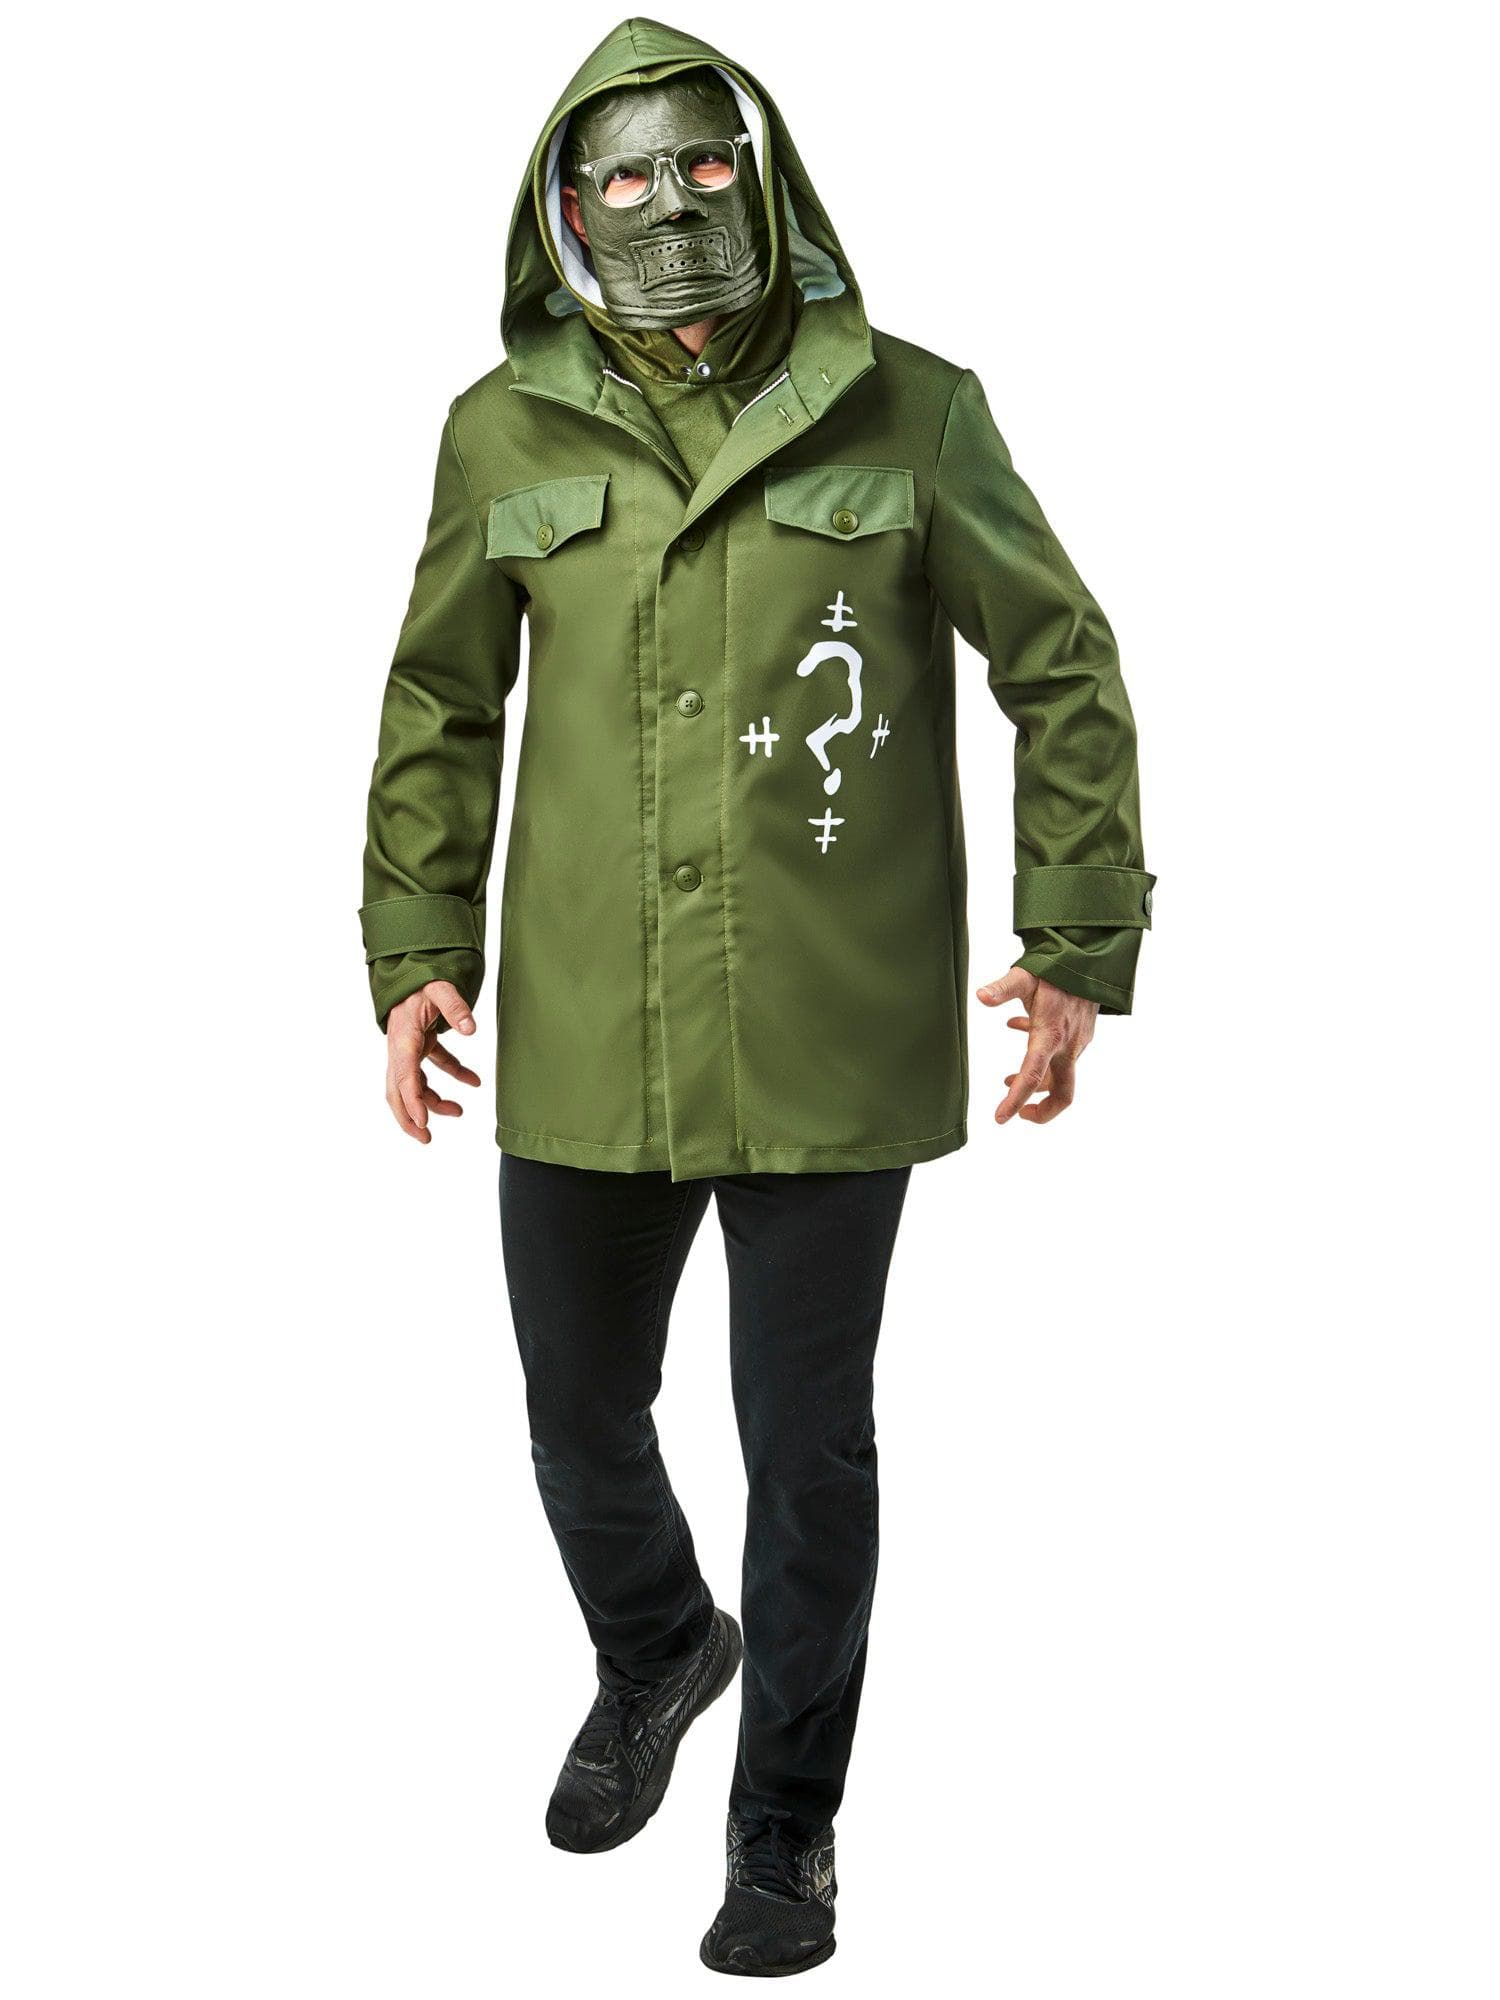 The Batman Riddler Adult Deluxe Costume - costumes.com